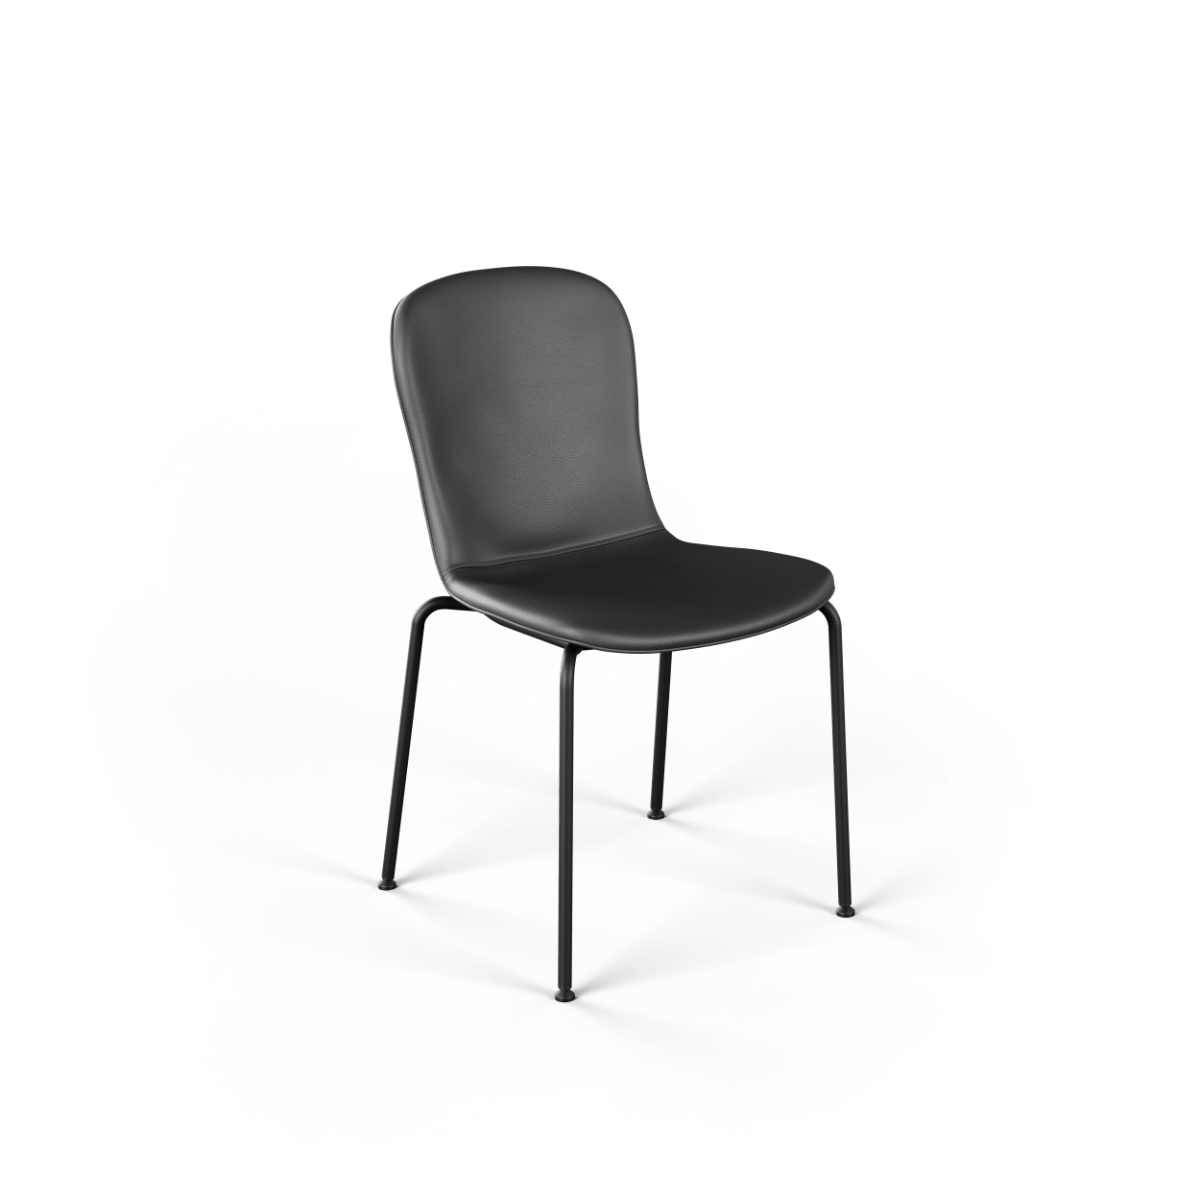 variant_8700006% | Chair no. One S1 [Contract] - TERRA Black - SACKit - Danmark | Chair no. One S1 [Contract] - TERRA Black | SACKit